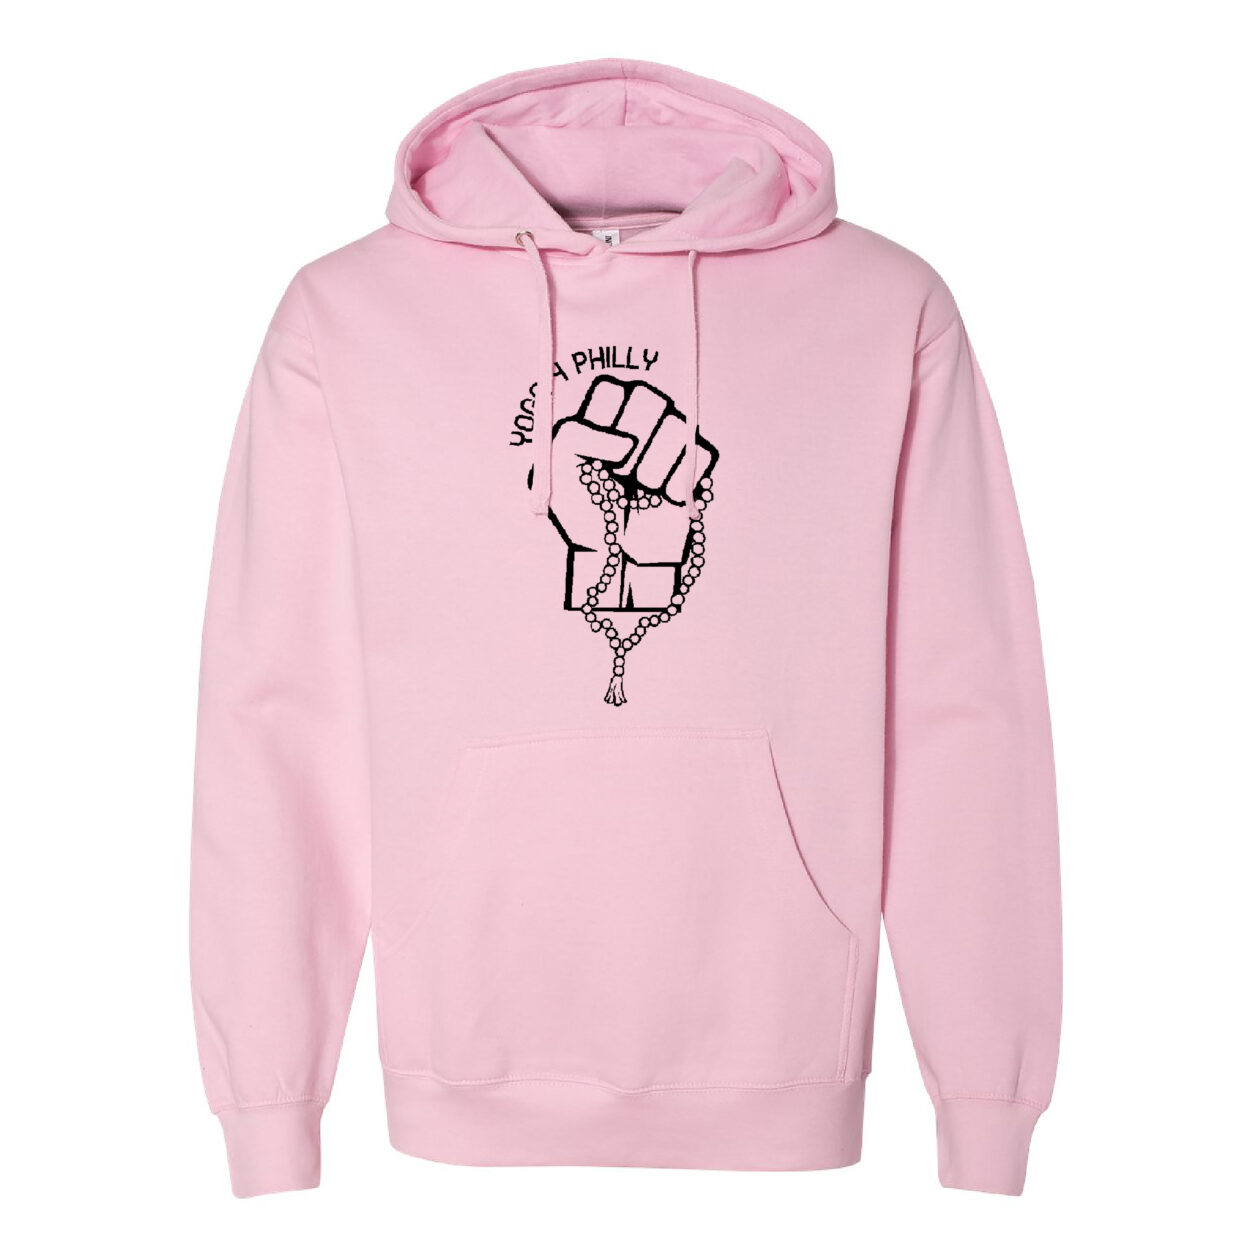 Yoga 4 philly Light Pink hoodie